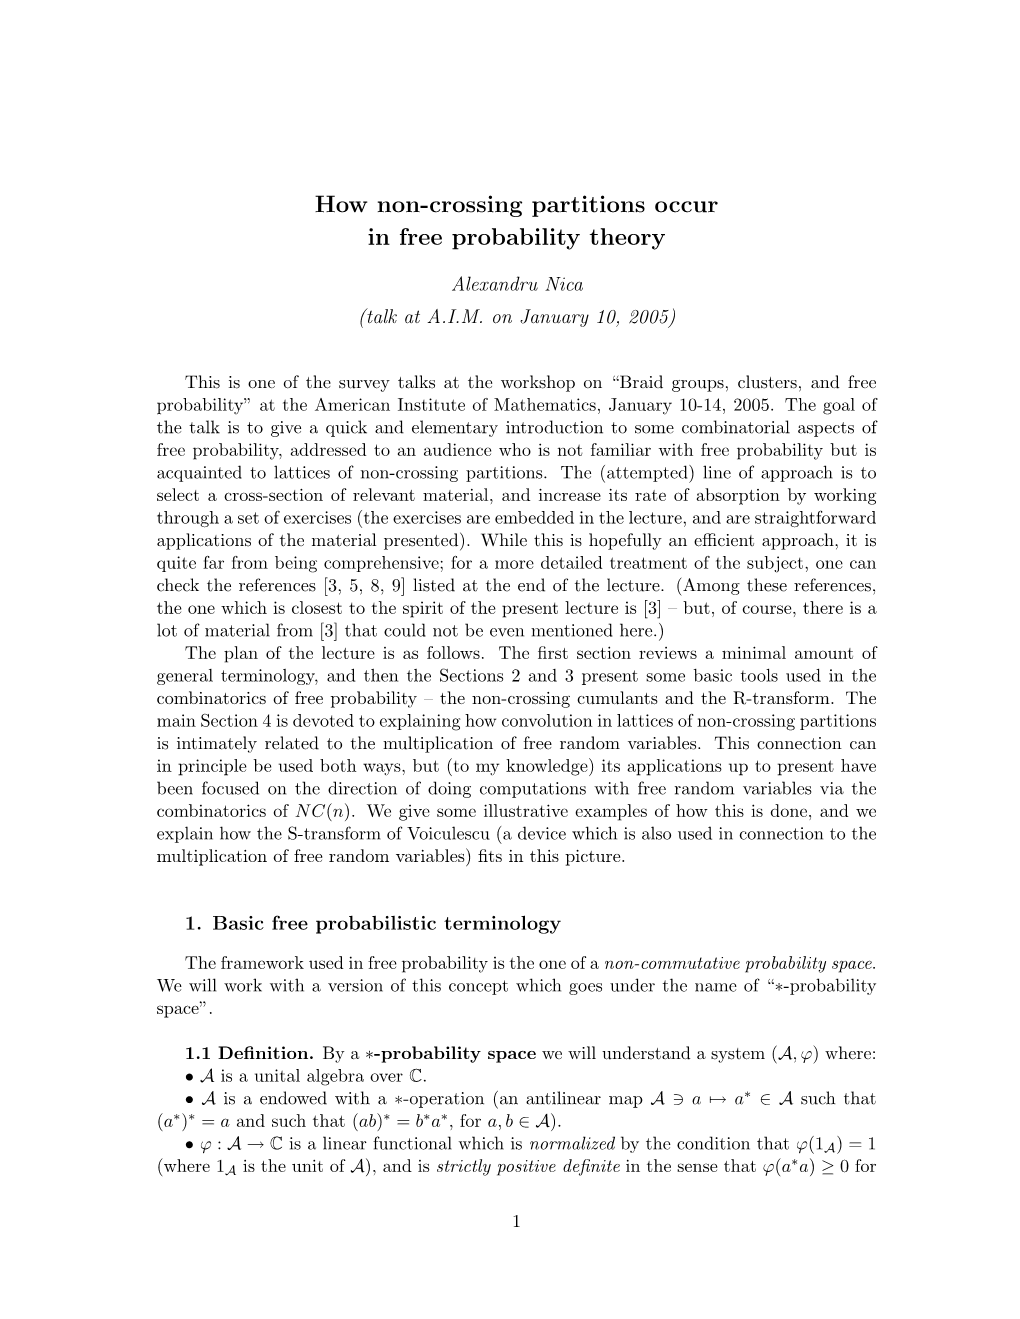 How Non-Crossing Partitions Occur in Free Probability Theory